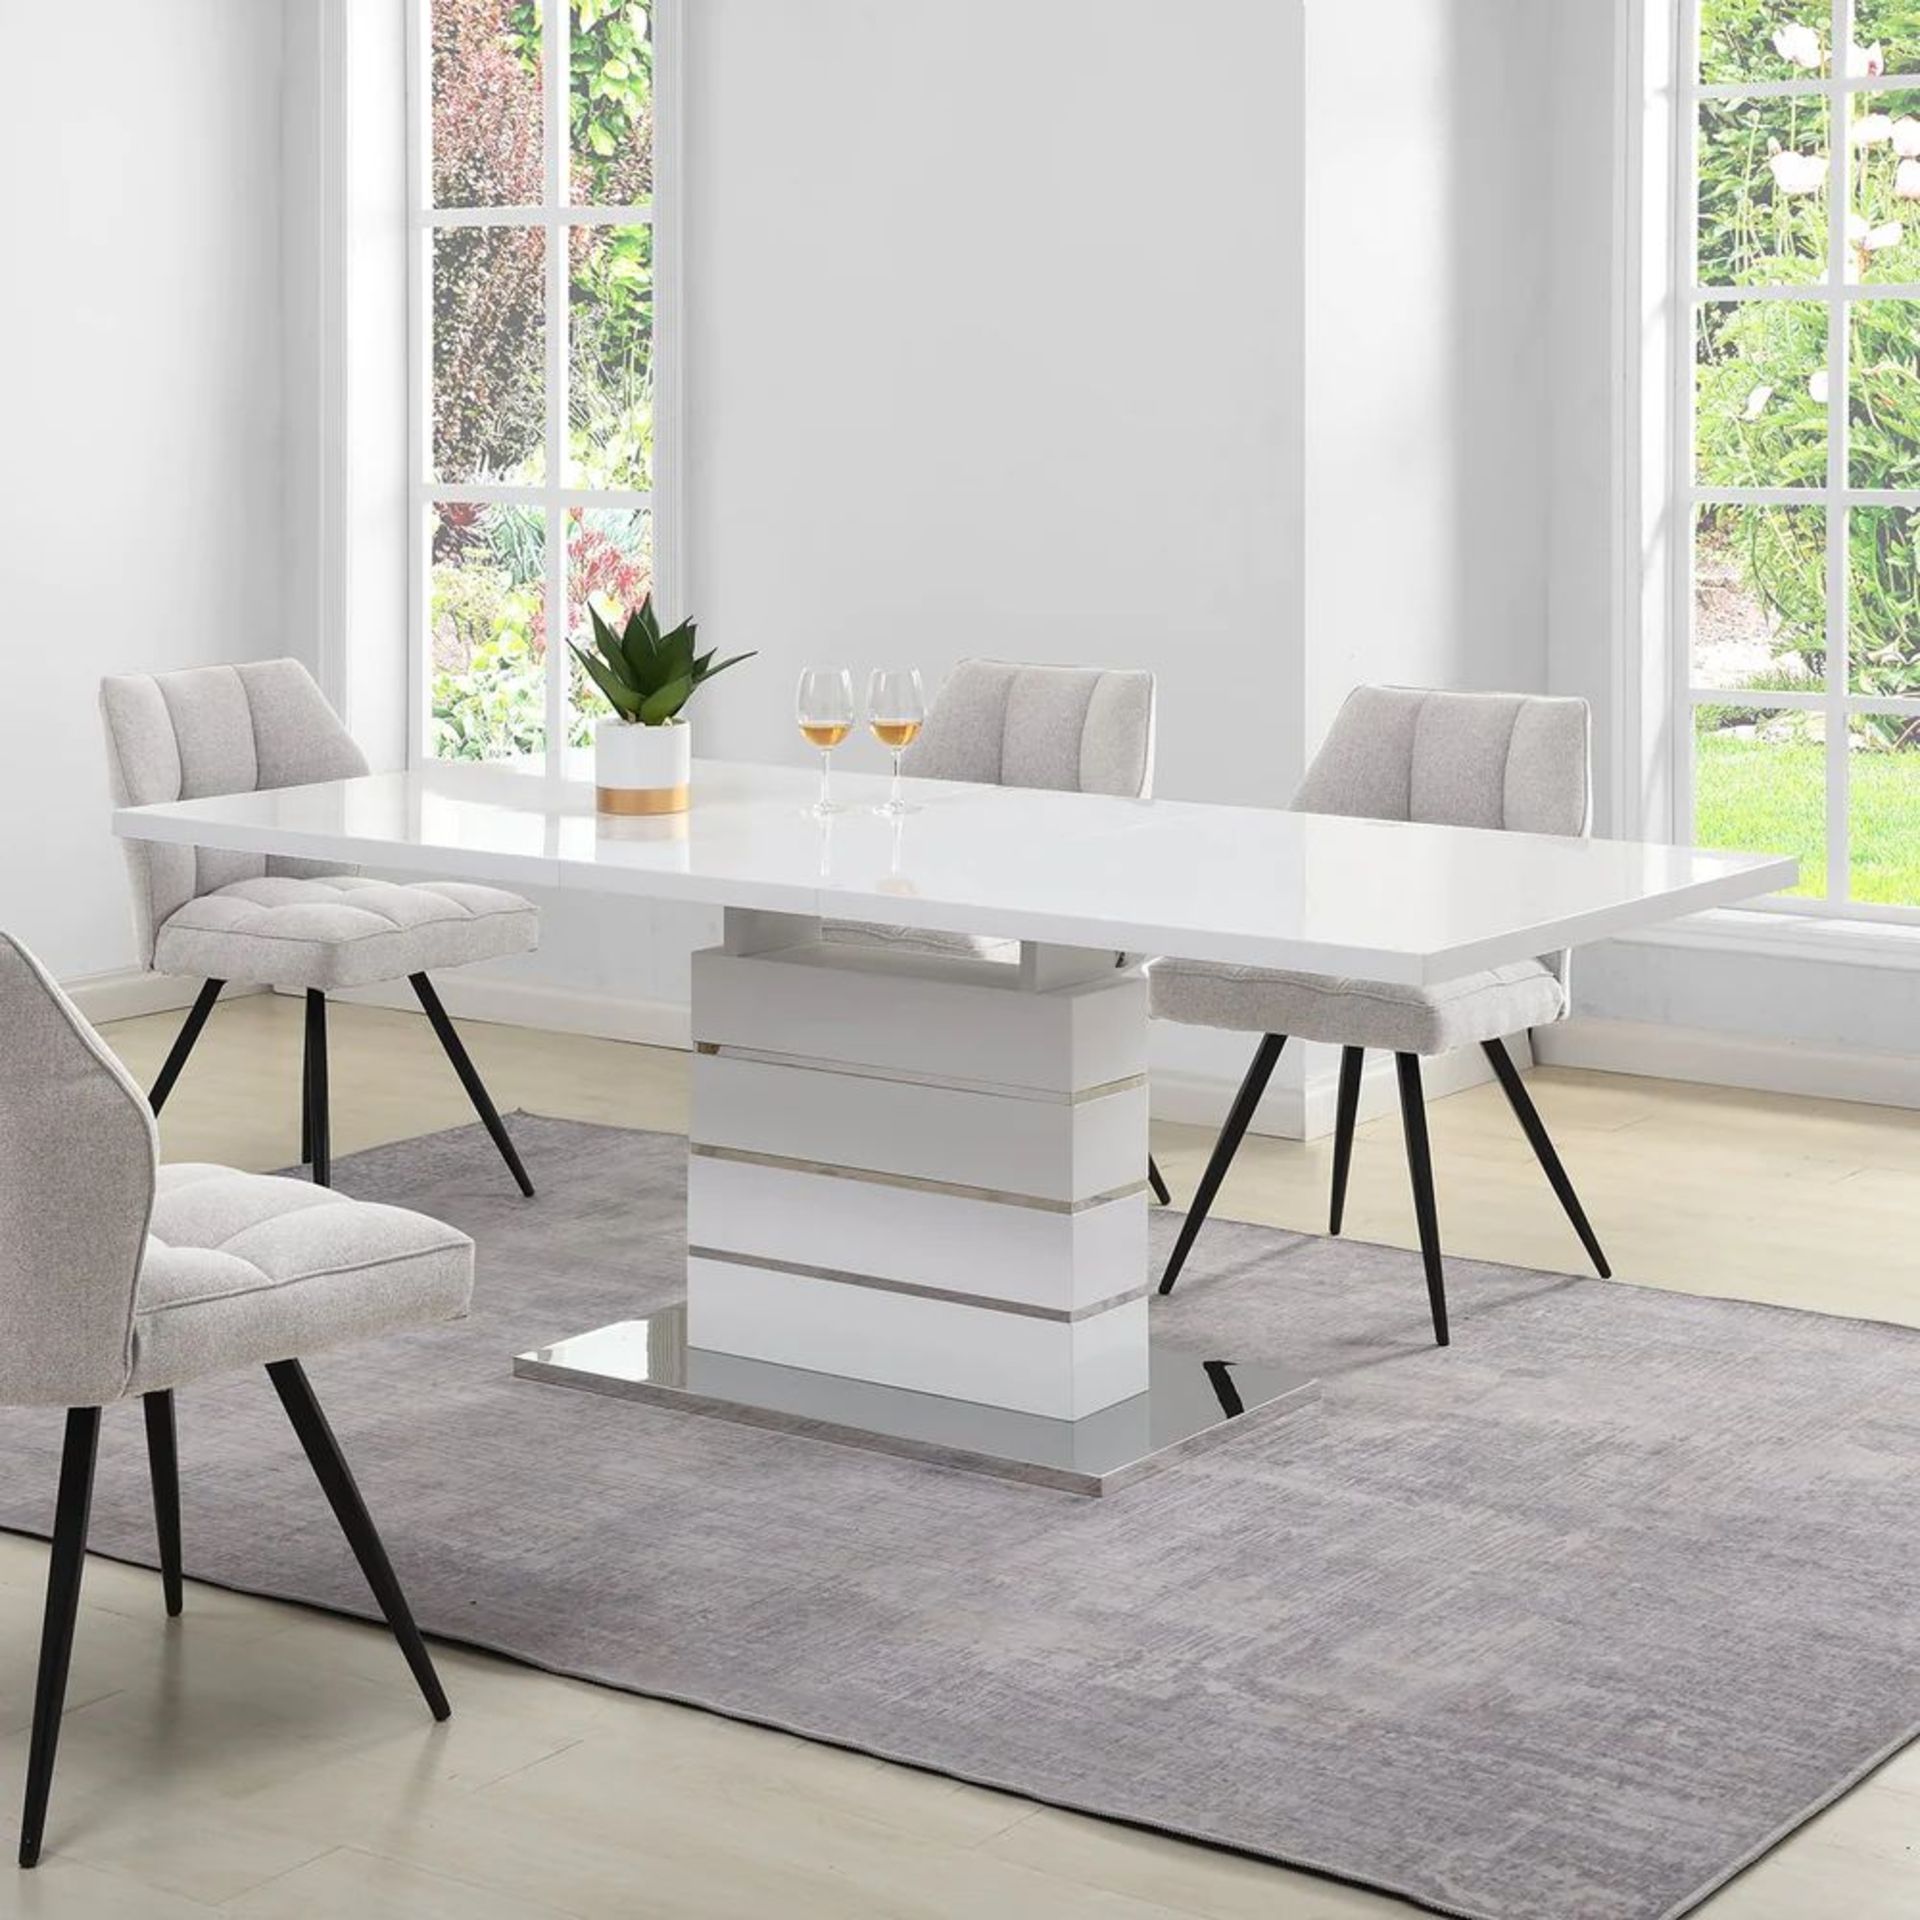 Hayne High Gloss White Extending Dining Table 6 to 8 Seater. - ER25. RRP £679.99. The Hayne table is